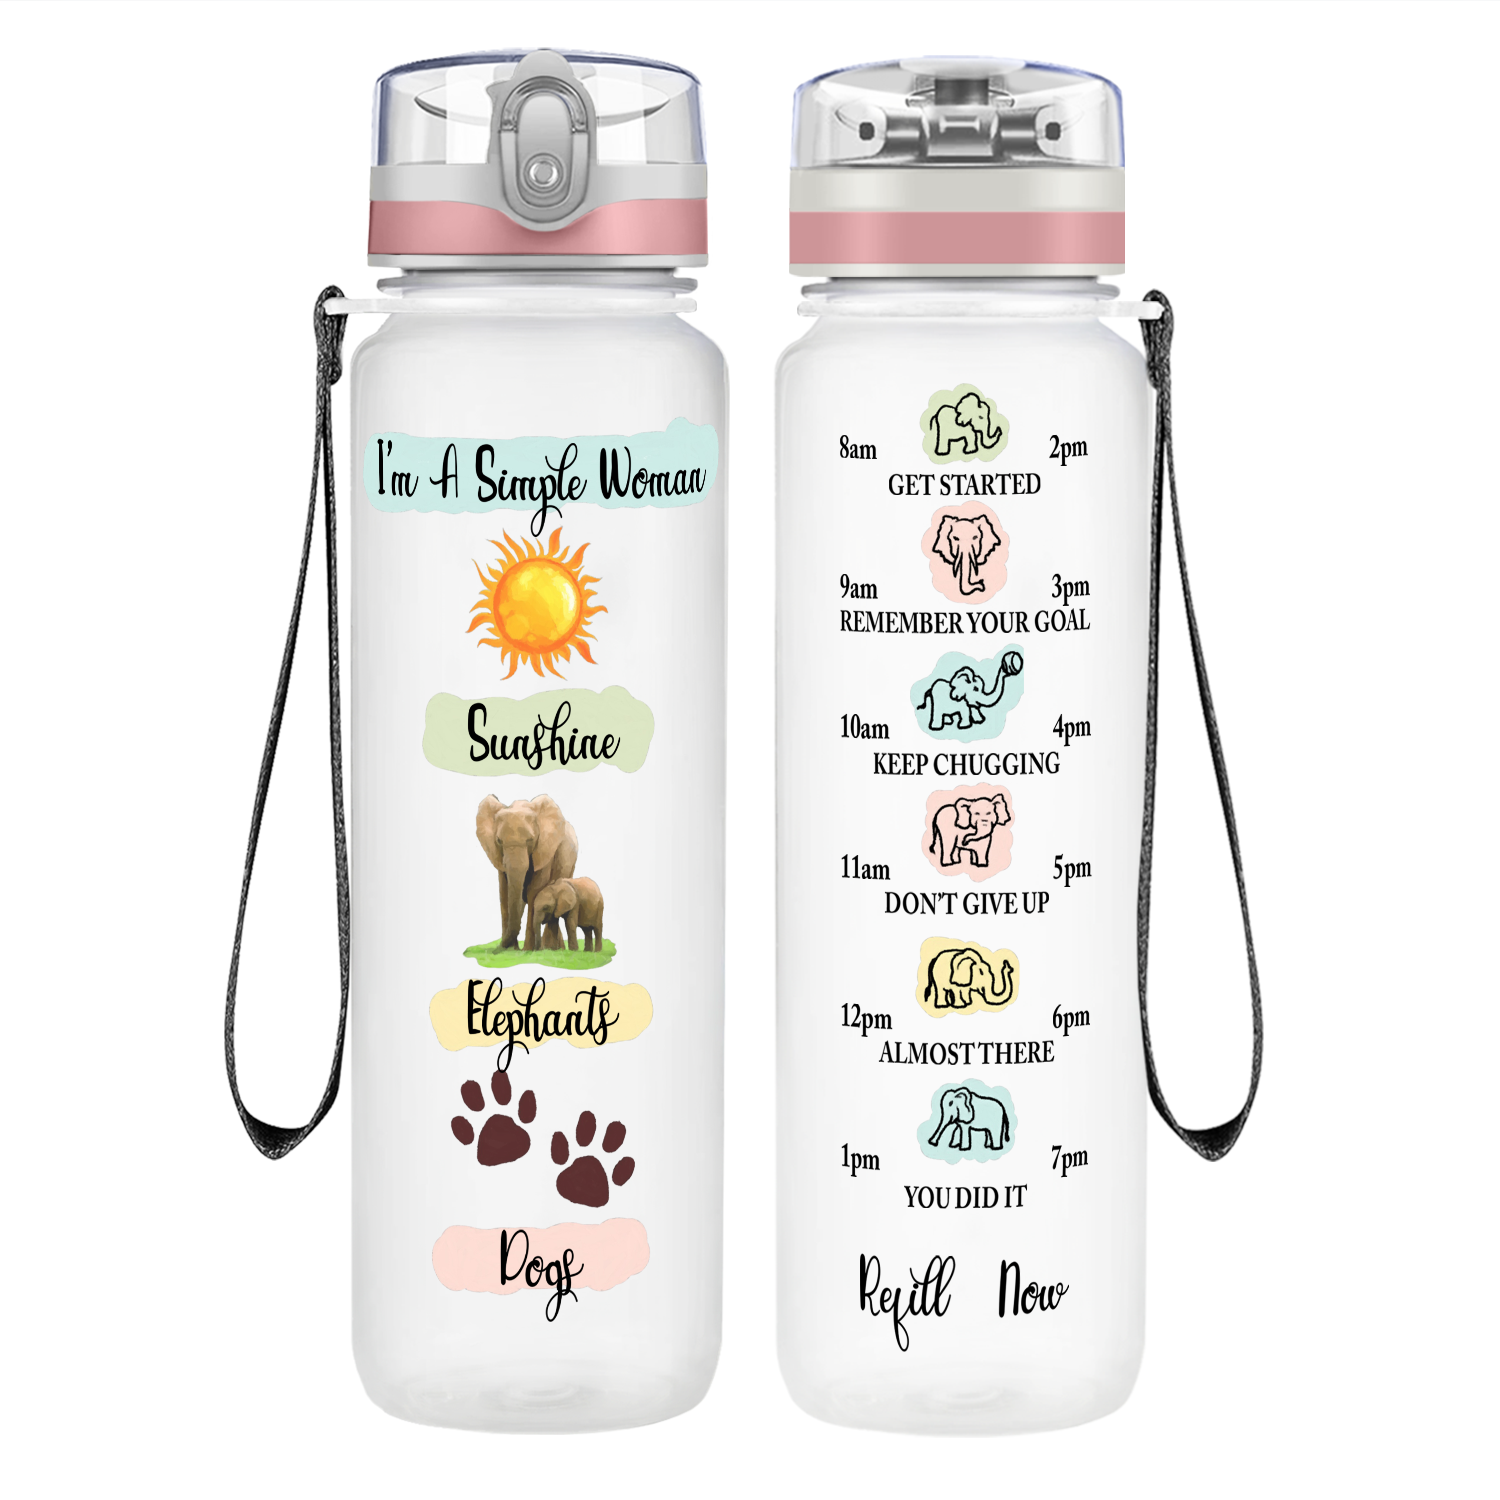 I'm a Simple Woman on 32 oz Motivational Tracking Water Bottle